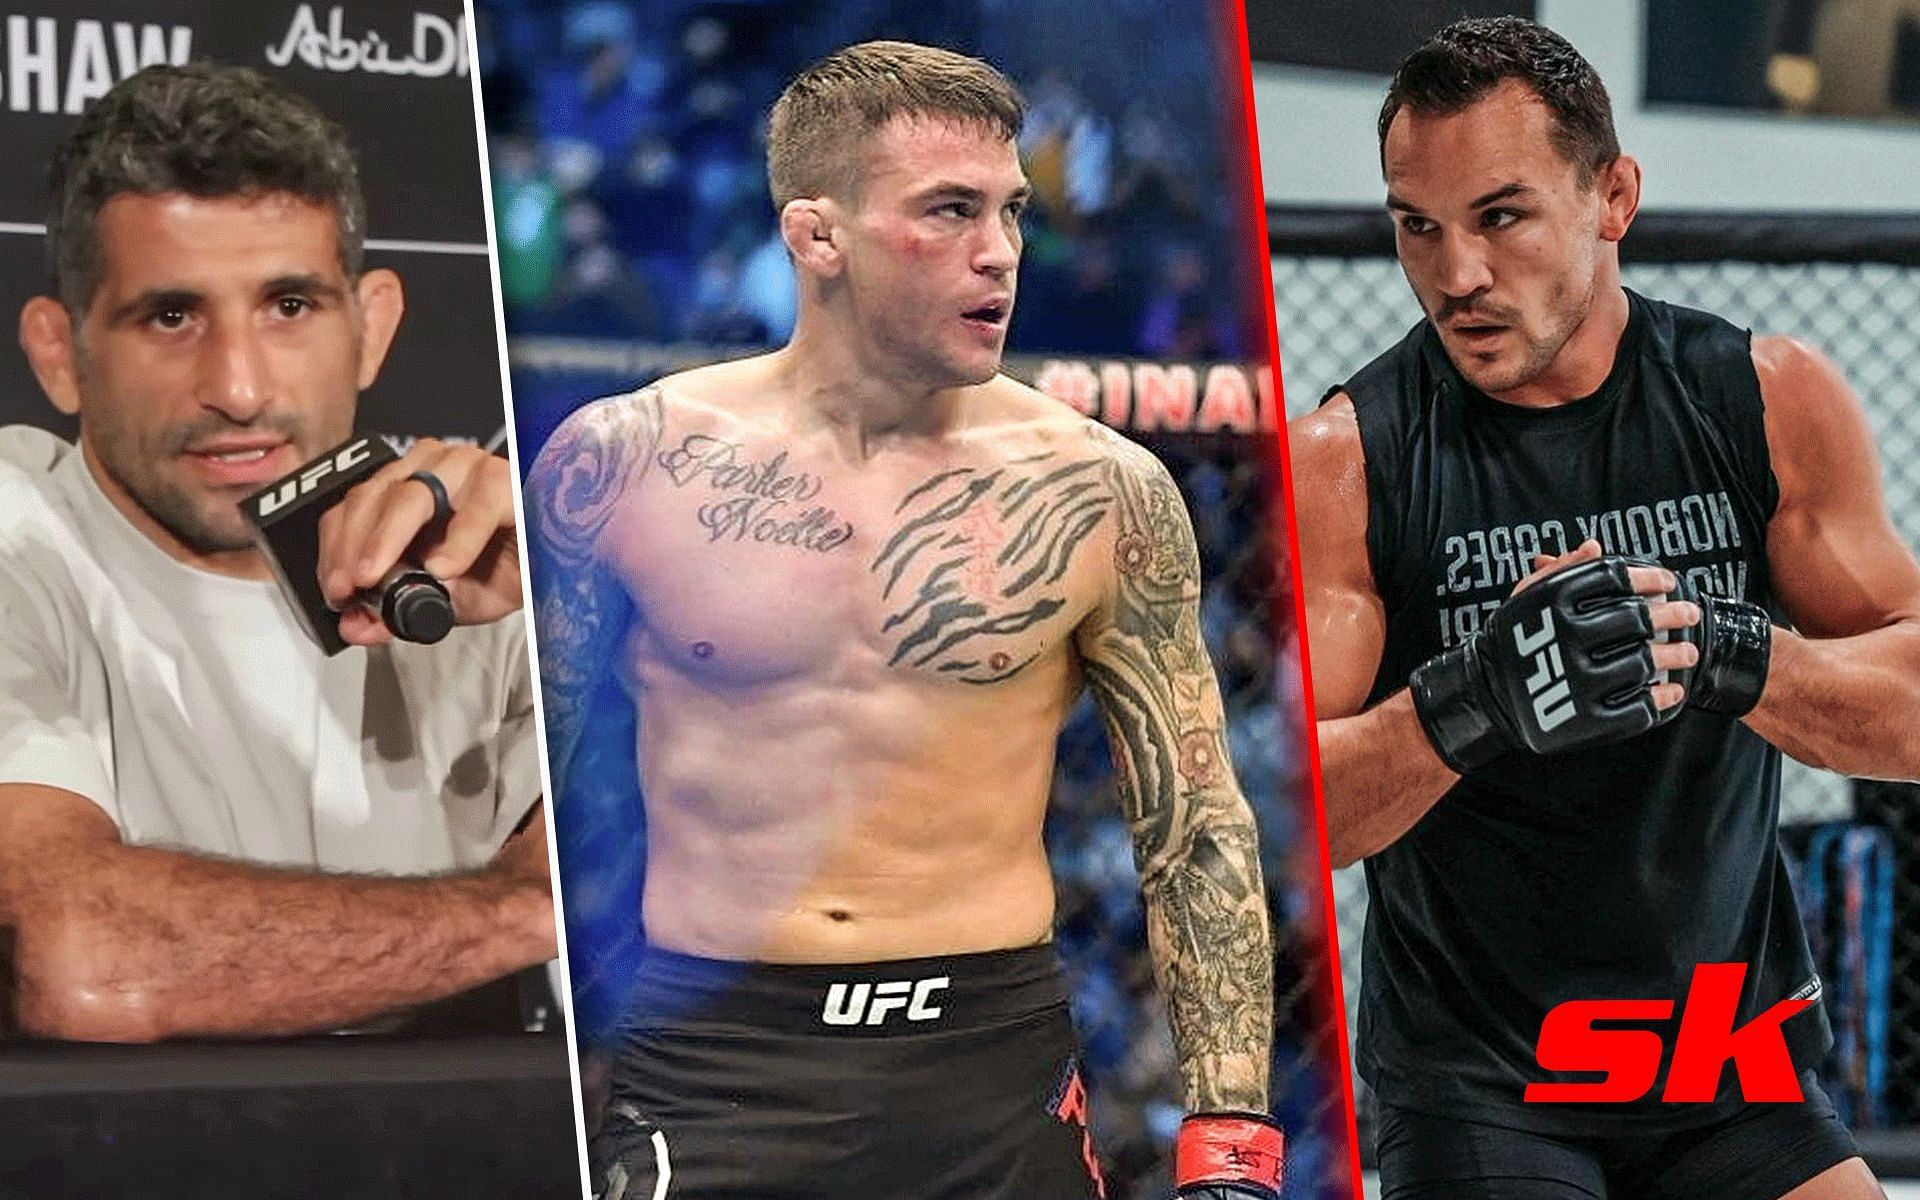 Beneil Dariush (Left), Dustin Poirier (Middle), Michael Chandler (Right) [Image courtesy: @TheMacLife on YouTube, @dustinpoirier and @mikechandlermma on Instagram]